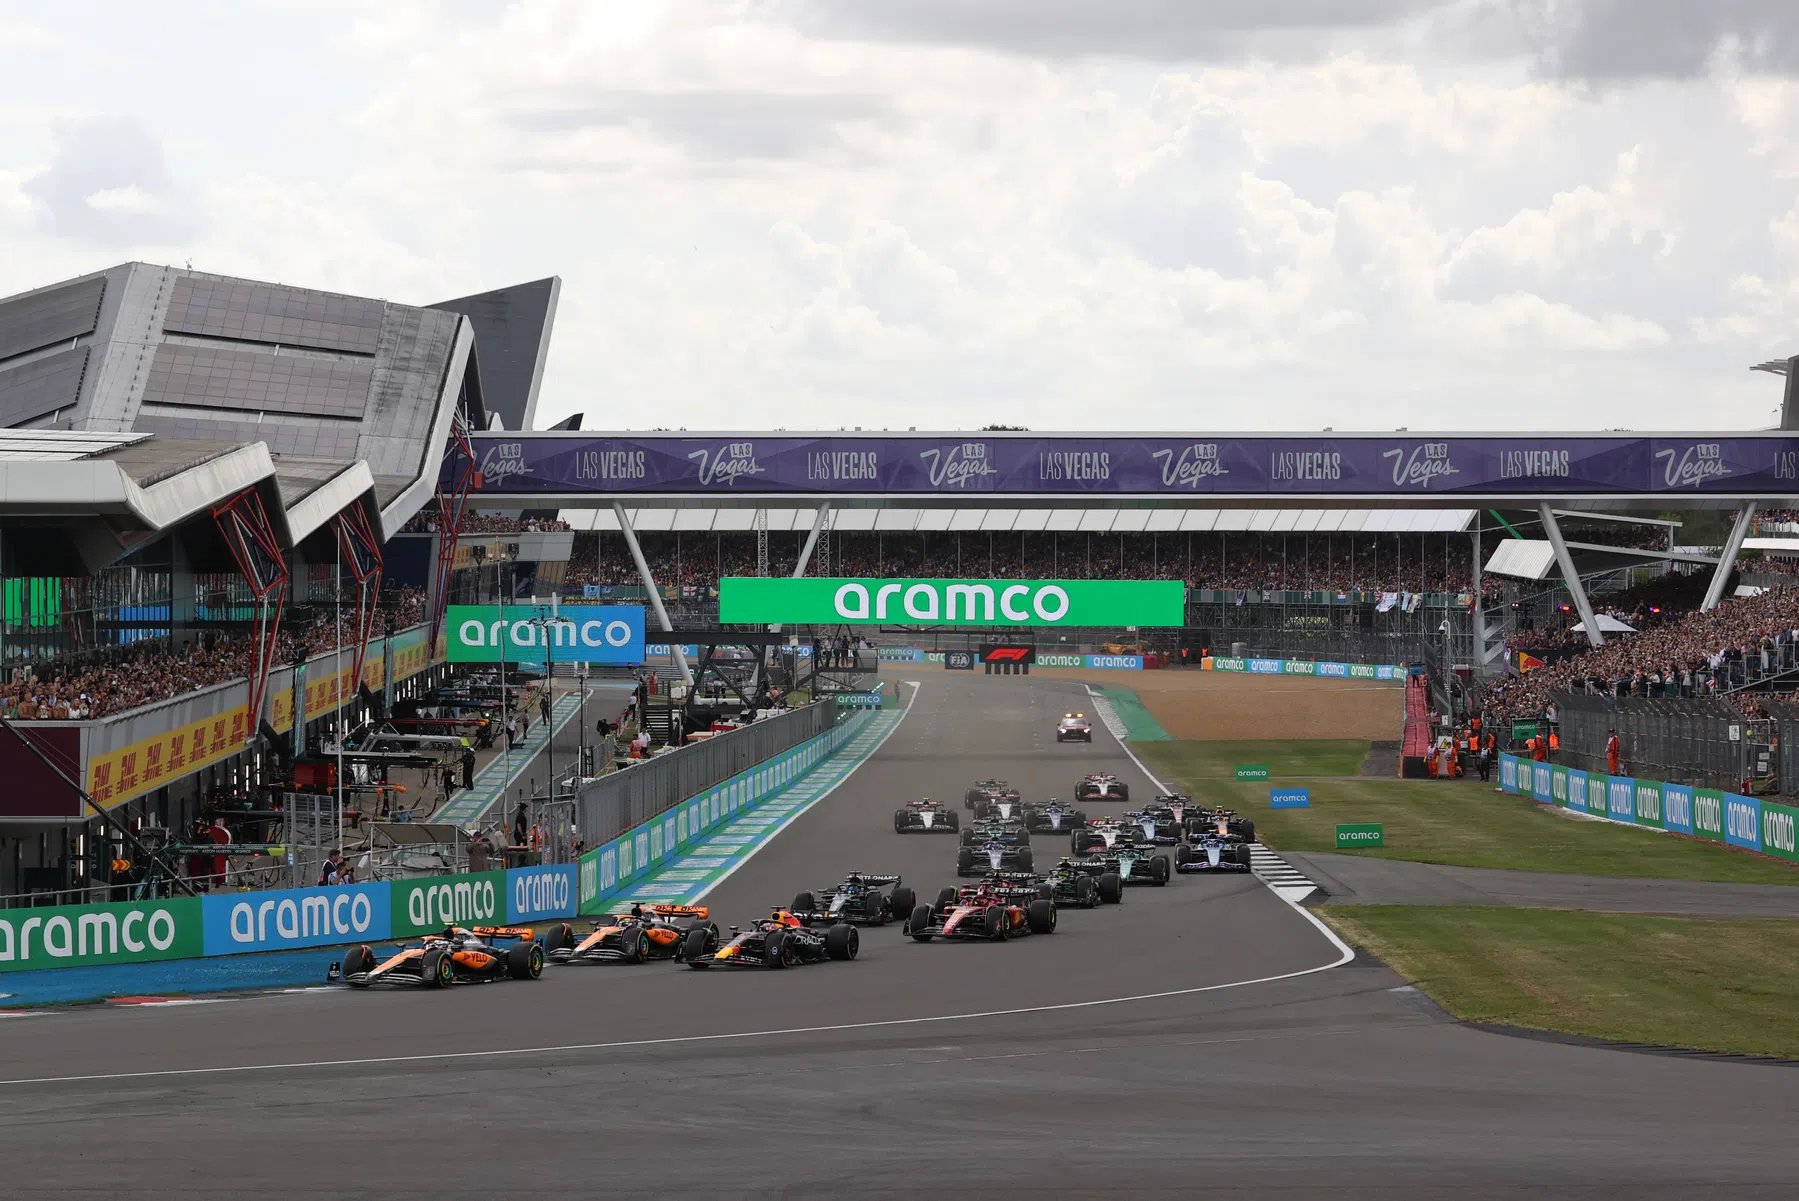 the weather forecast for the British Grand Prix